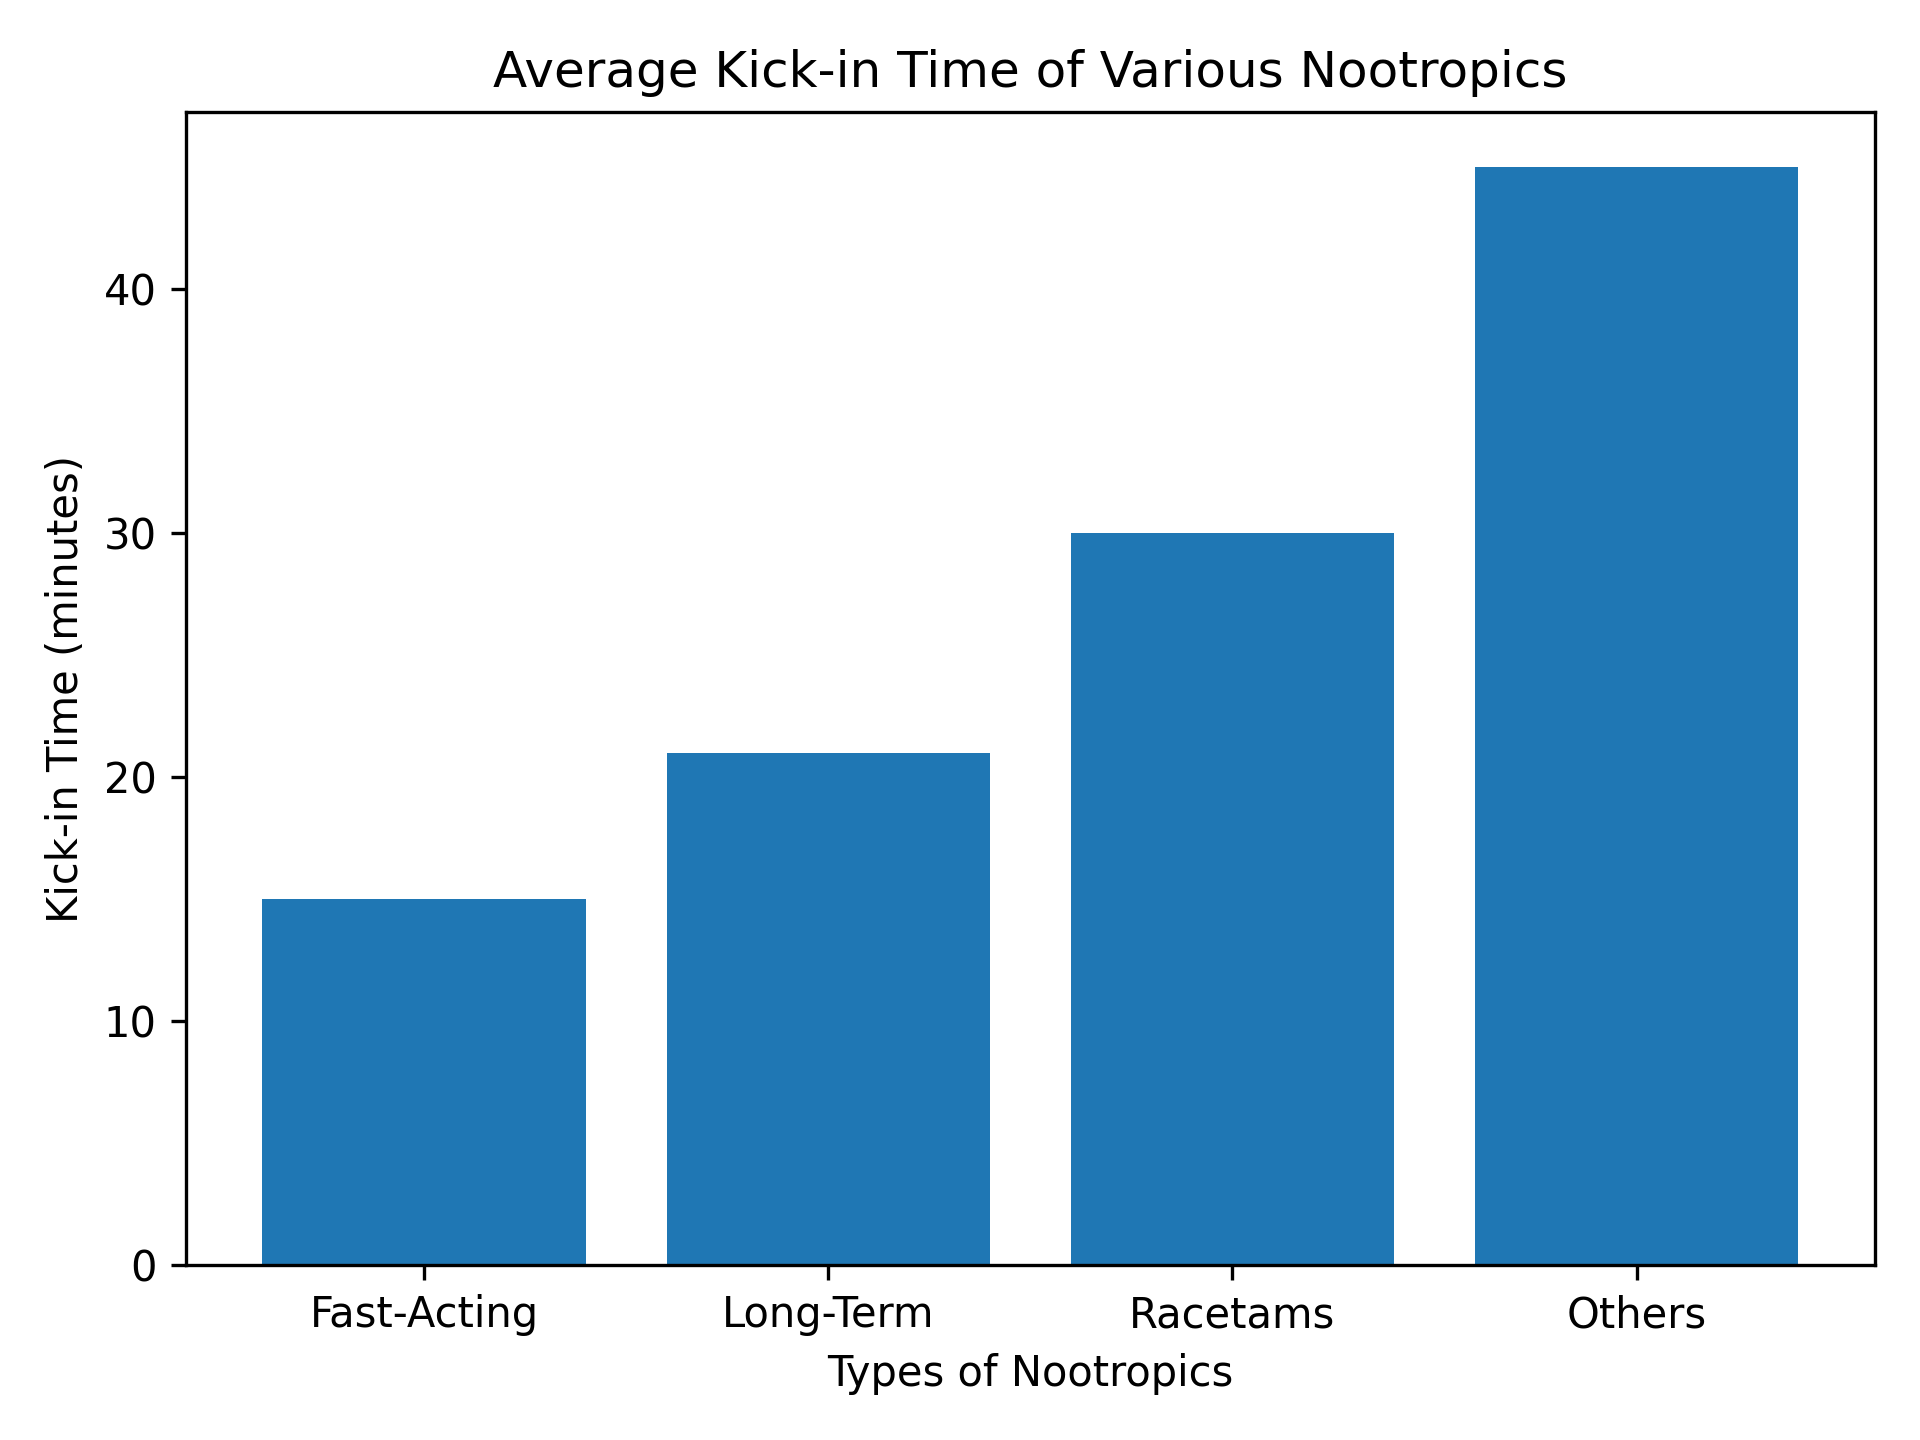 Nootropic kick in time (minutes) by type of Nootropics.